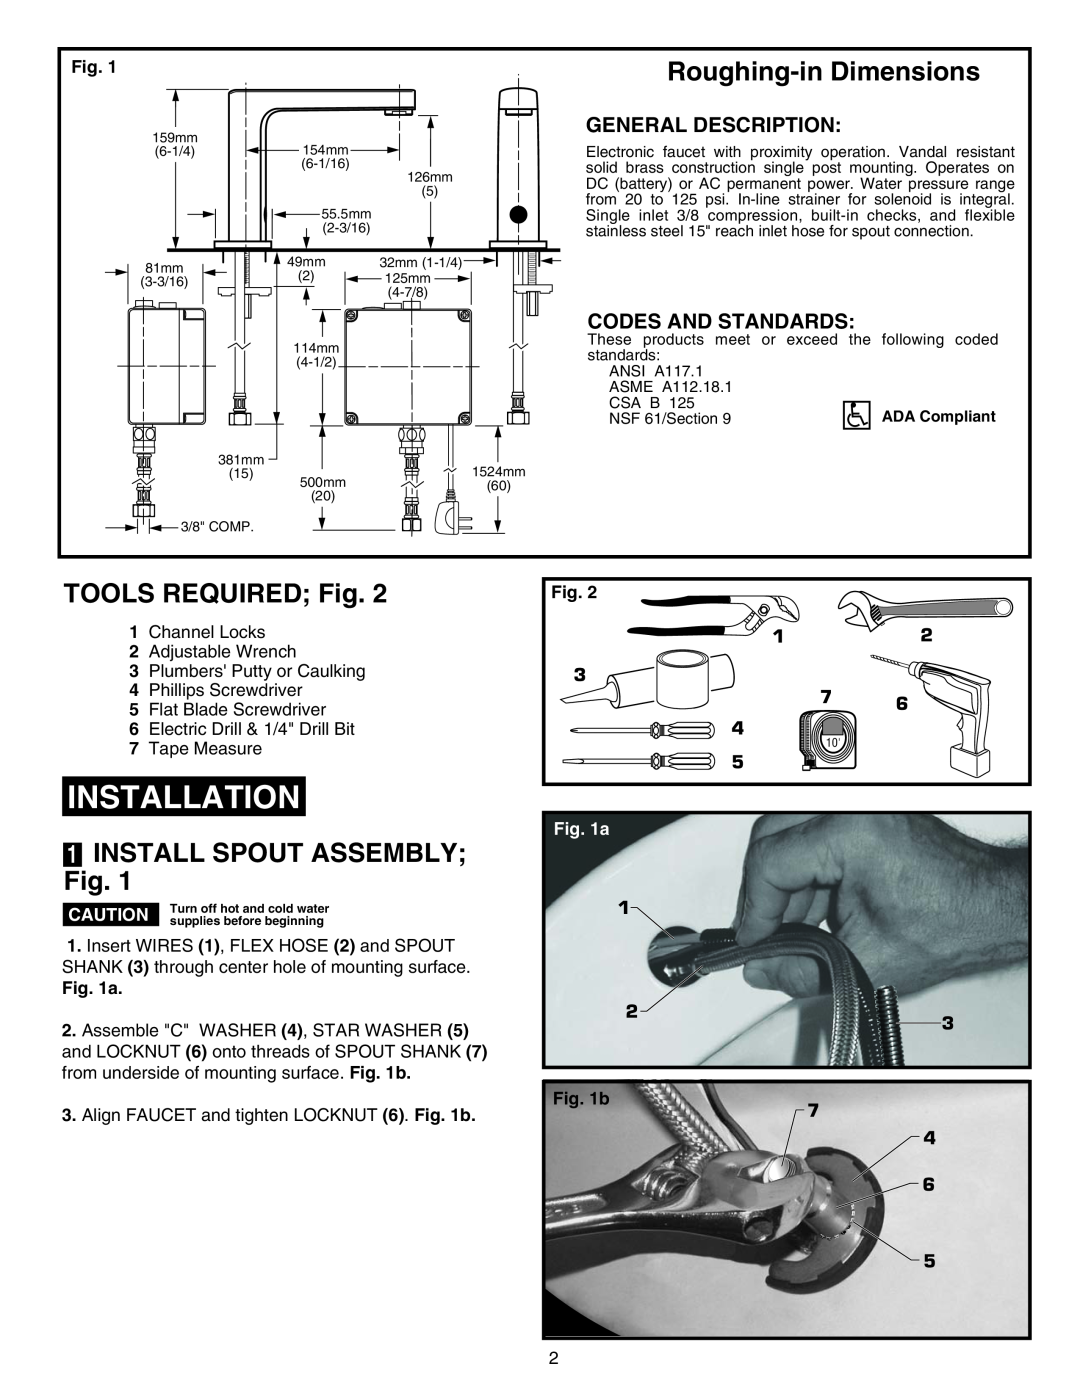 American Standard 256.1XX warranty Installation, Roughing-inDimensions, TOOLS REQUIRED Fig, 1INSTALL SPOUT ASSEMBLY Fig 